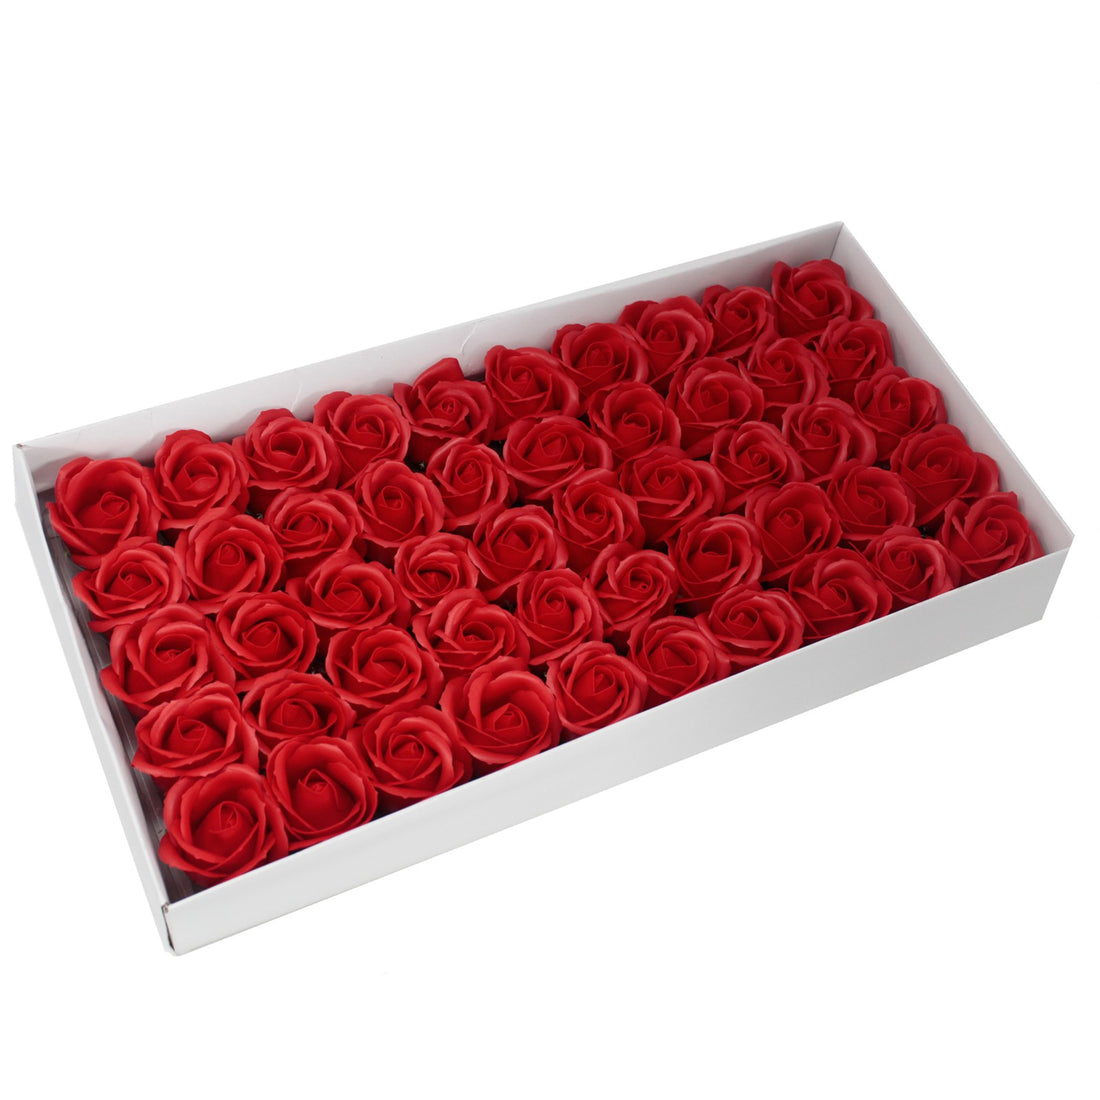 Craft Soap Flowers - Med Rose - Red x 10 pcs